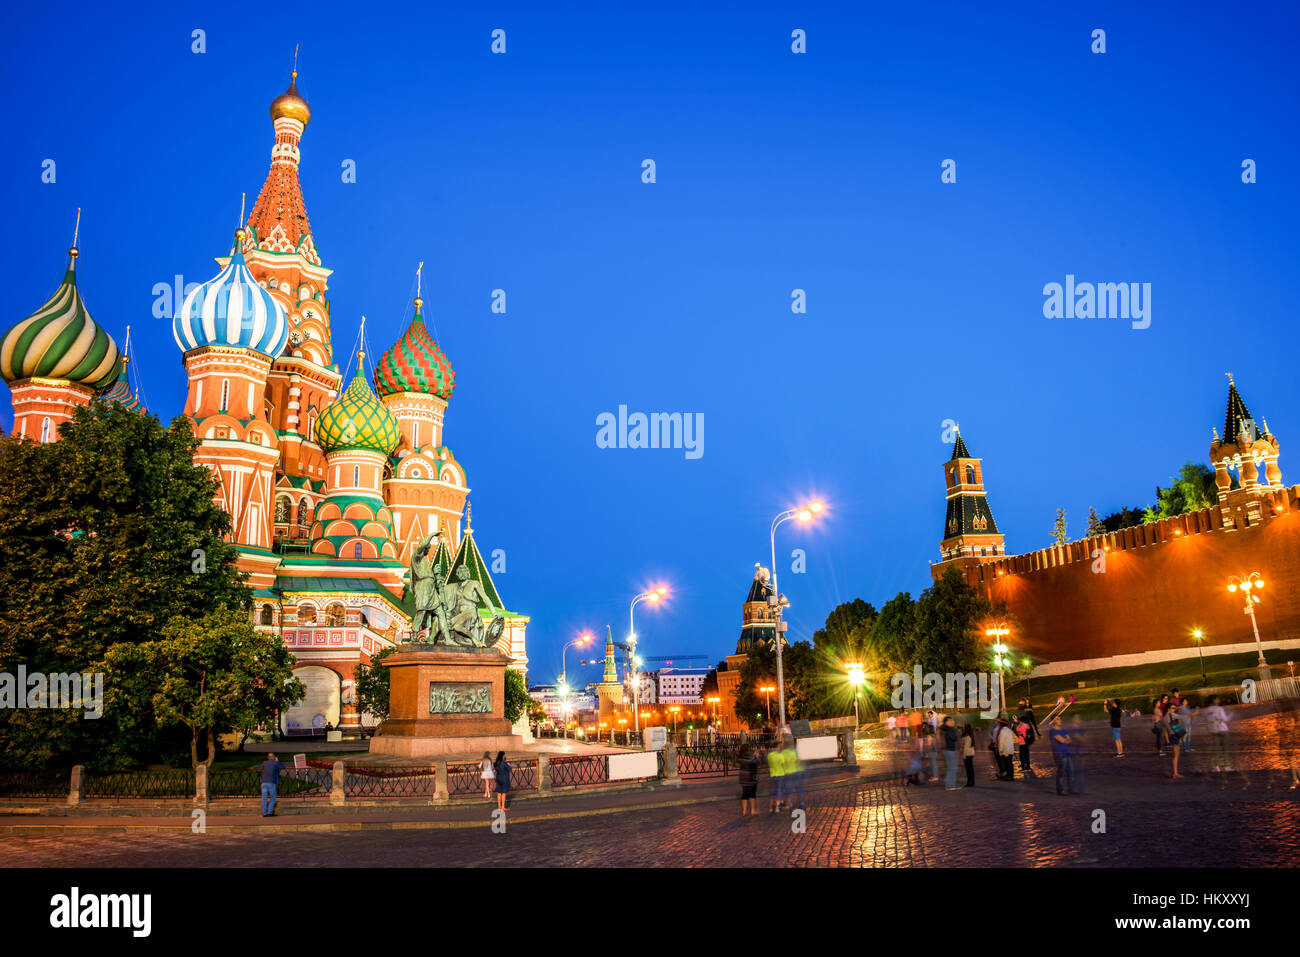 St Basil's cathedral on Red Square at night, Moscow, Russia Stock Photo